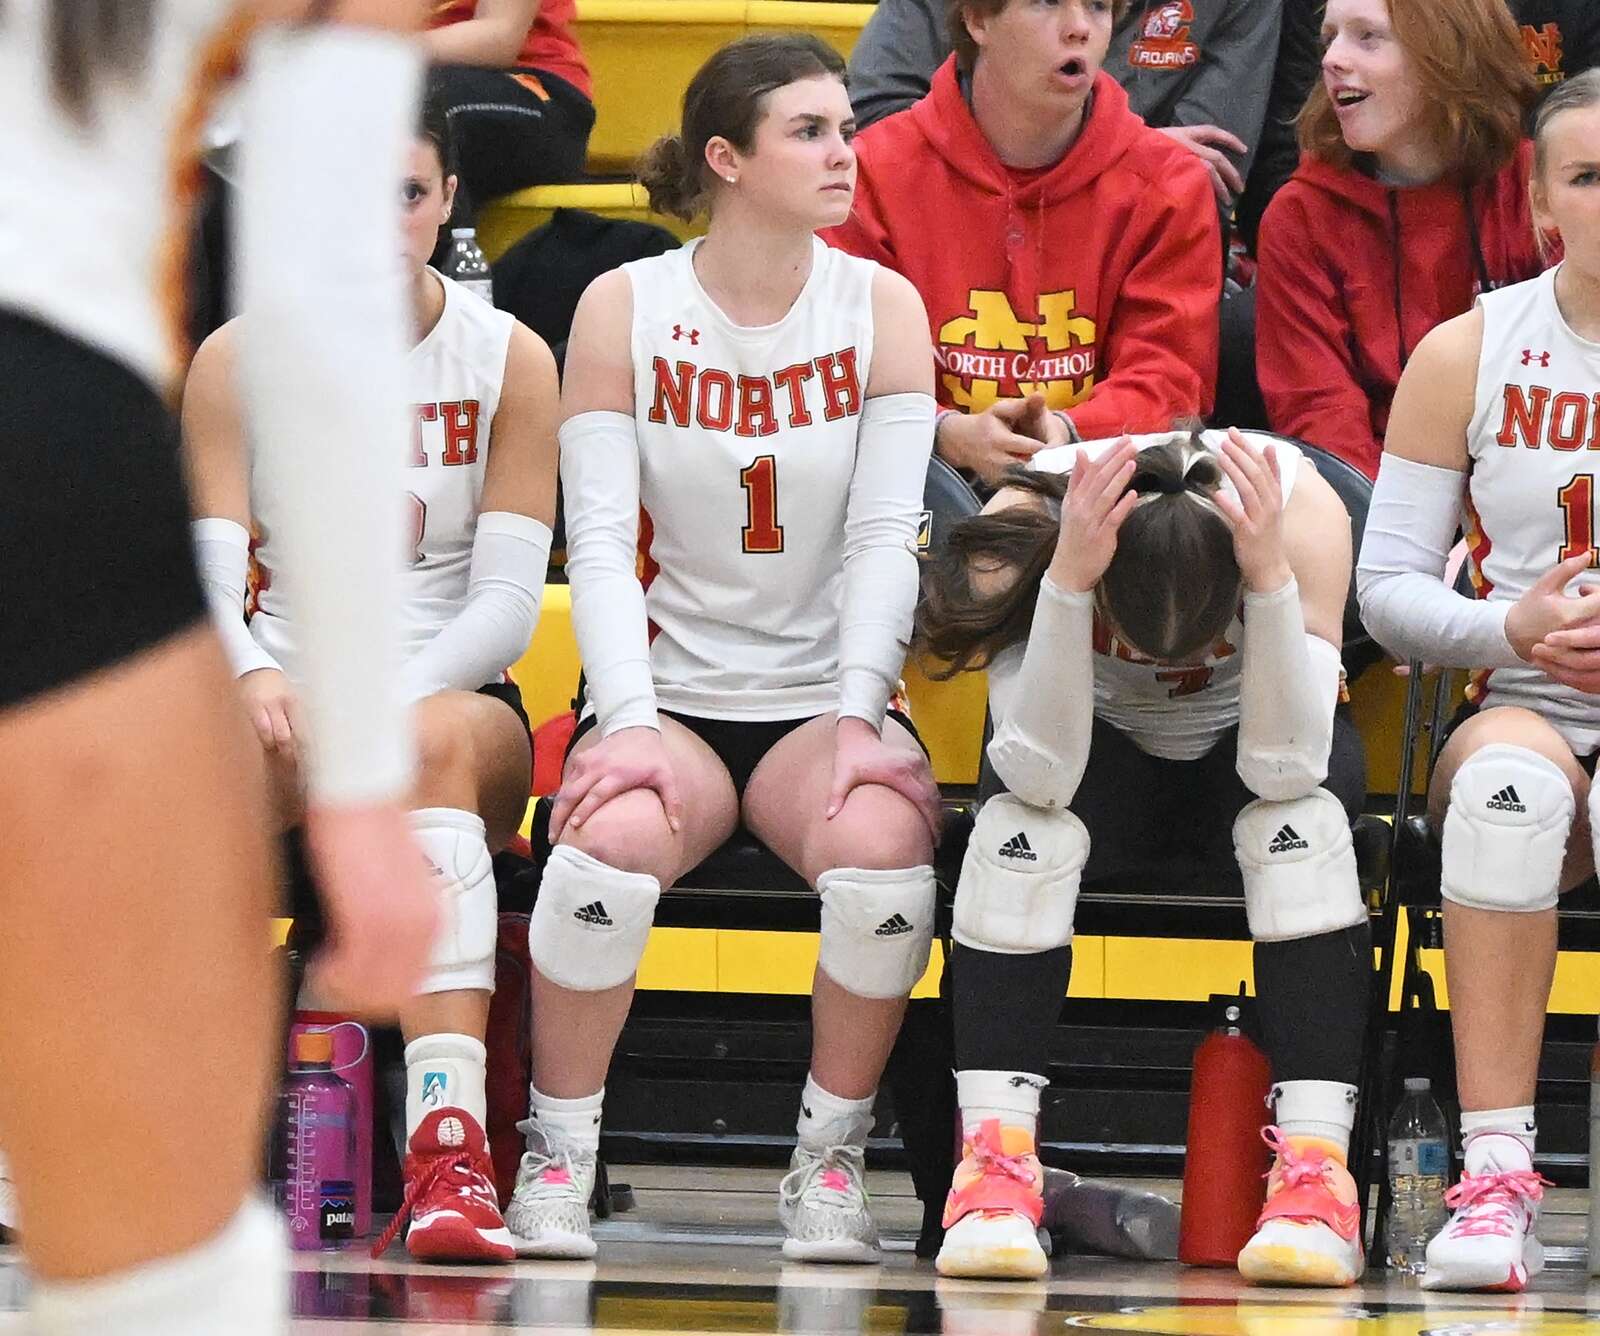 The North Catholic bench reacts after losing